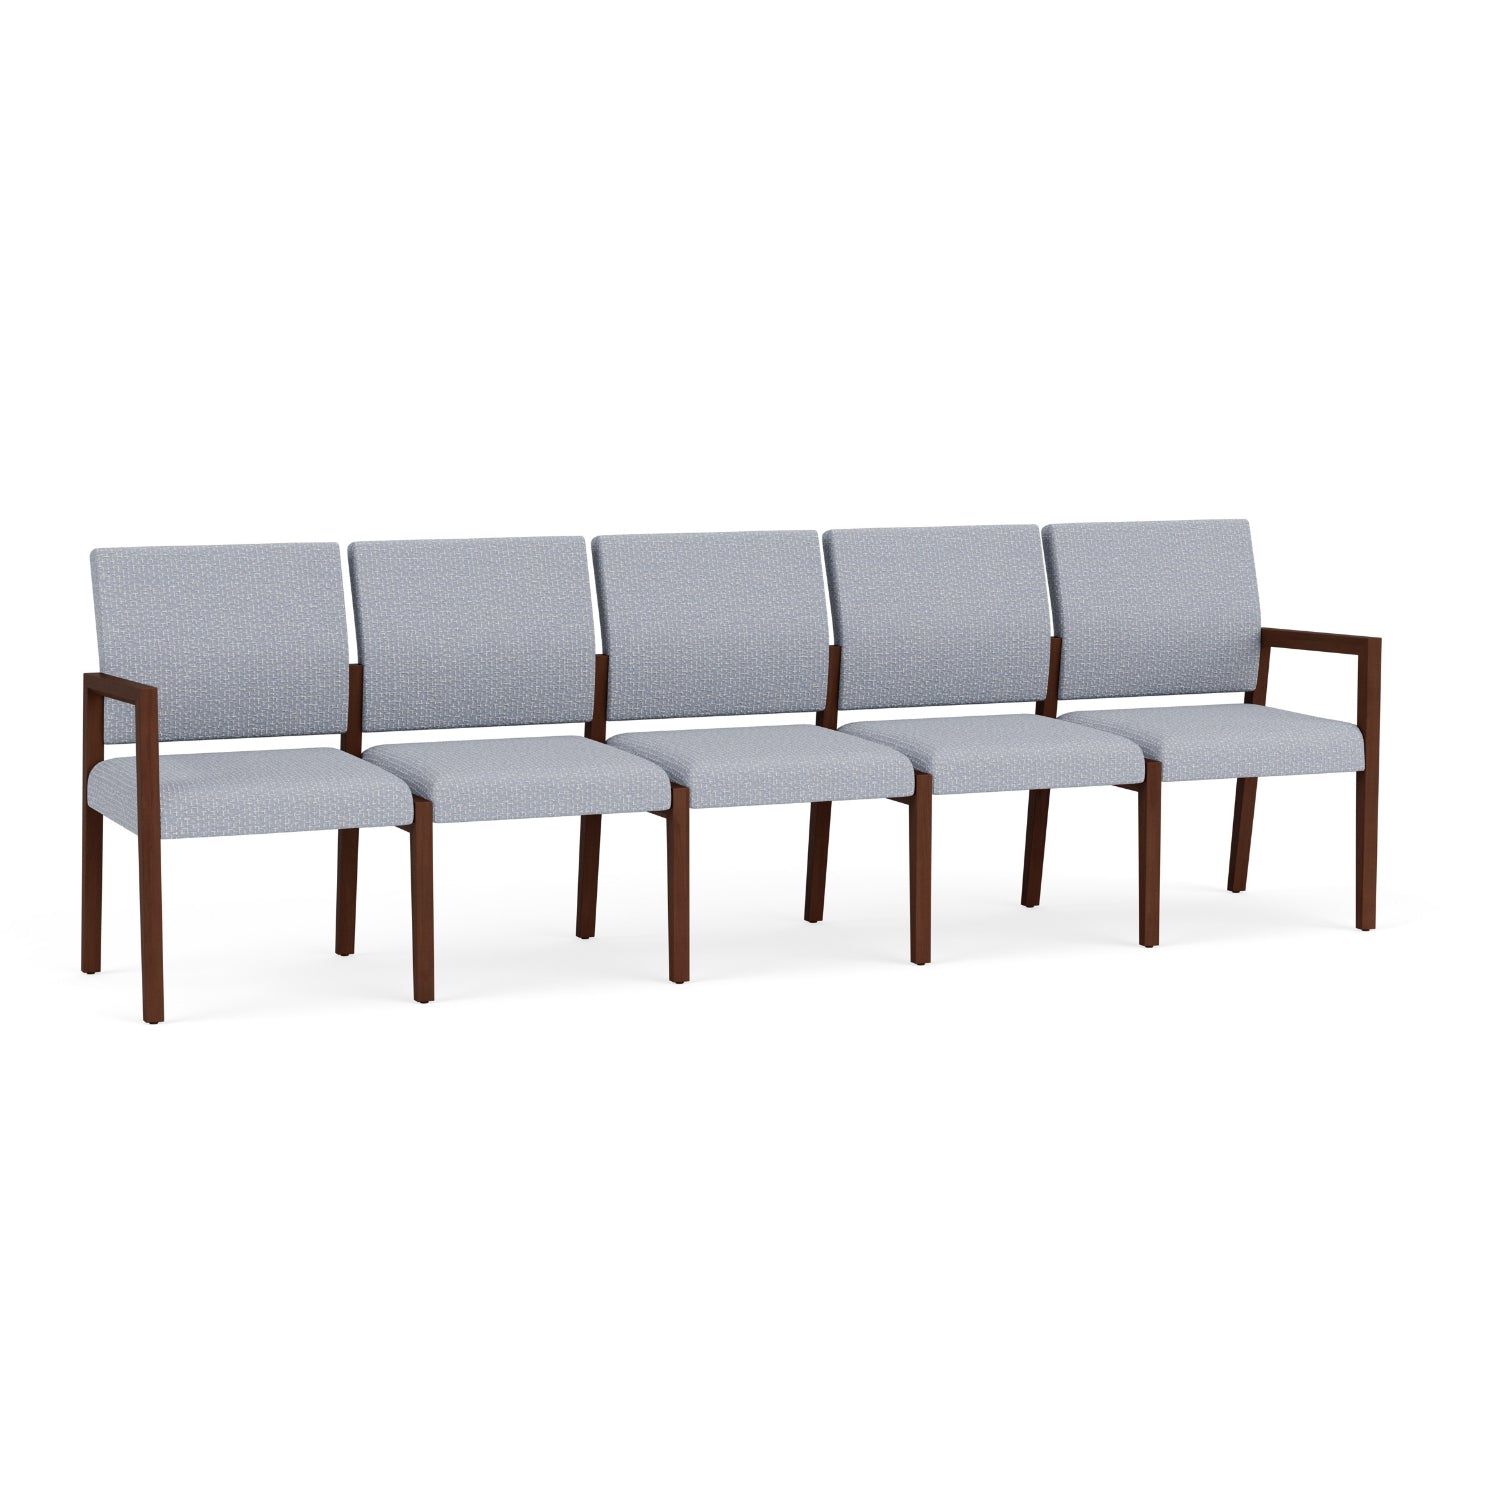 Brooklyn Collection Reception Seating, 5 Seat Sofa, Designer Fabric Upholstery, FREE SHIPPING